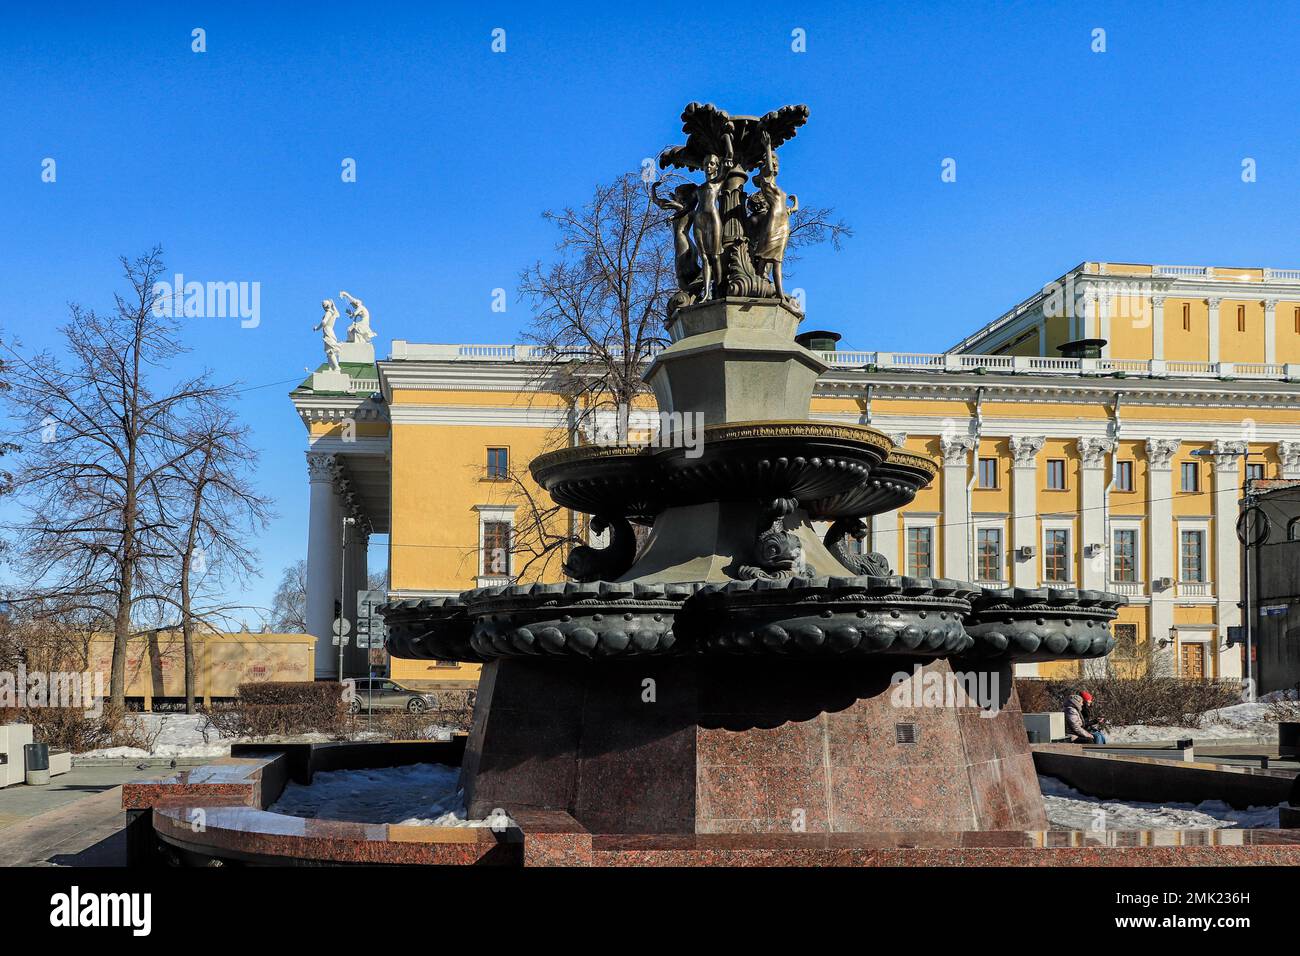 Non-working fountain in the center of the city. The photo was taken in Chelyabinsk, Russia. Stock Photo